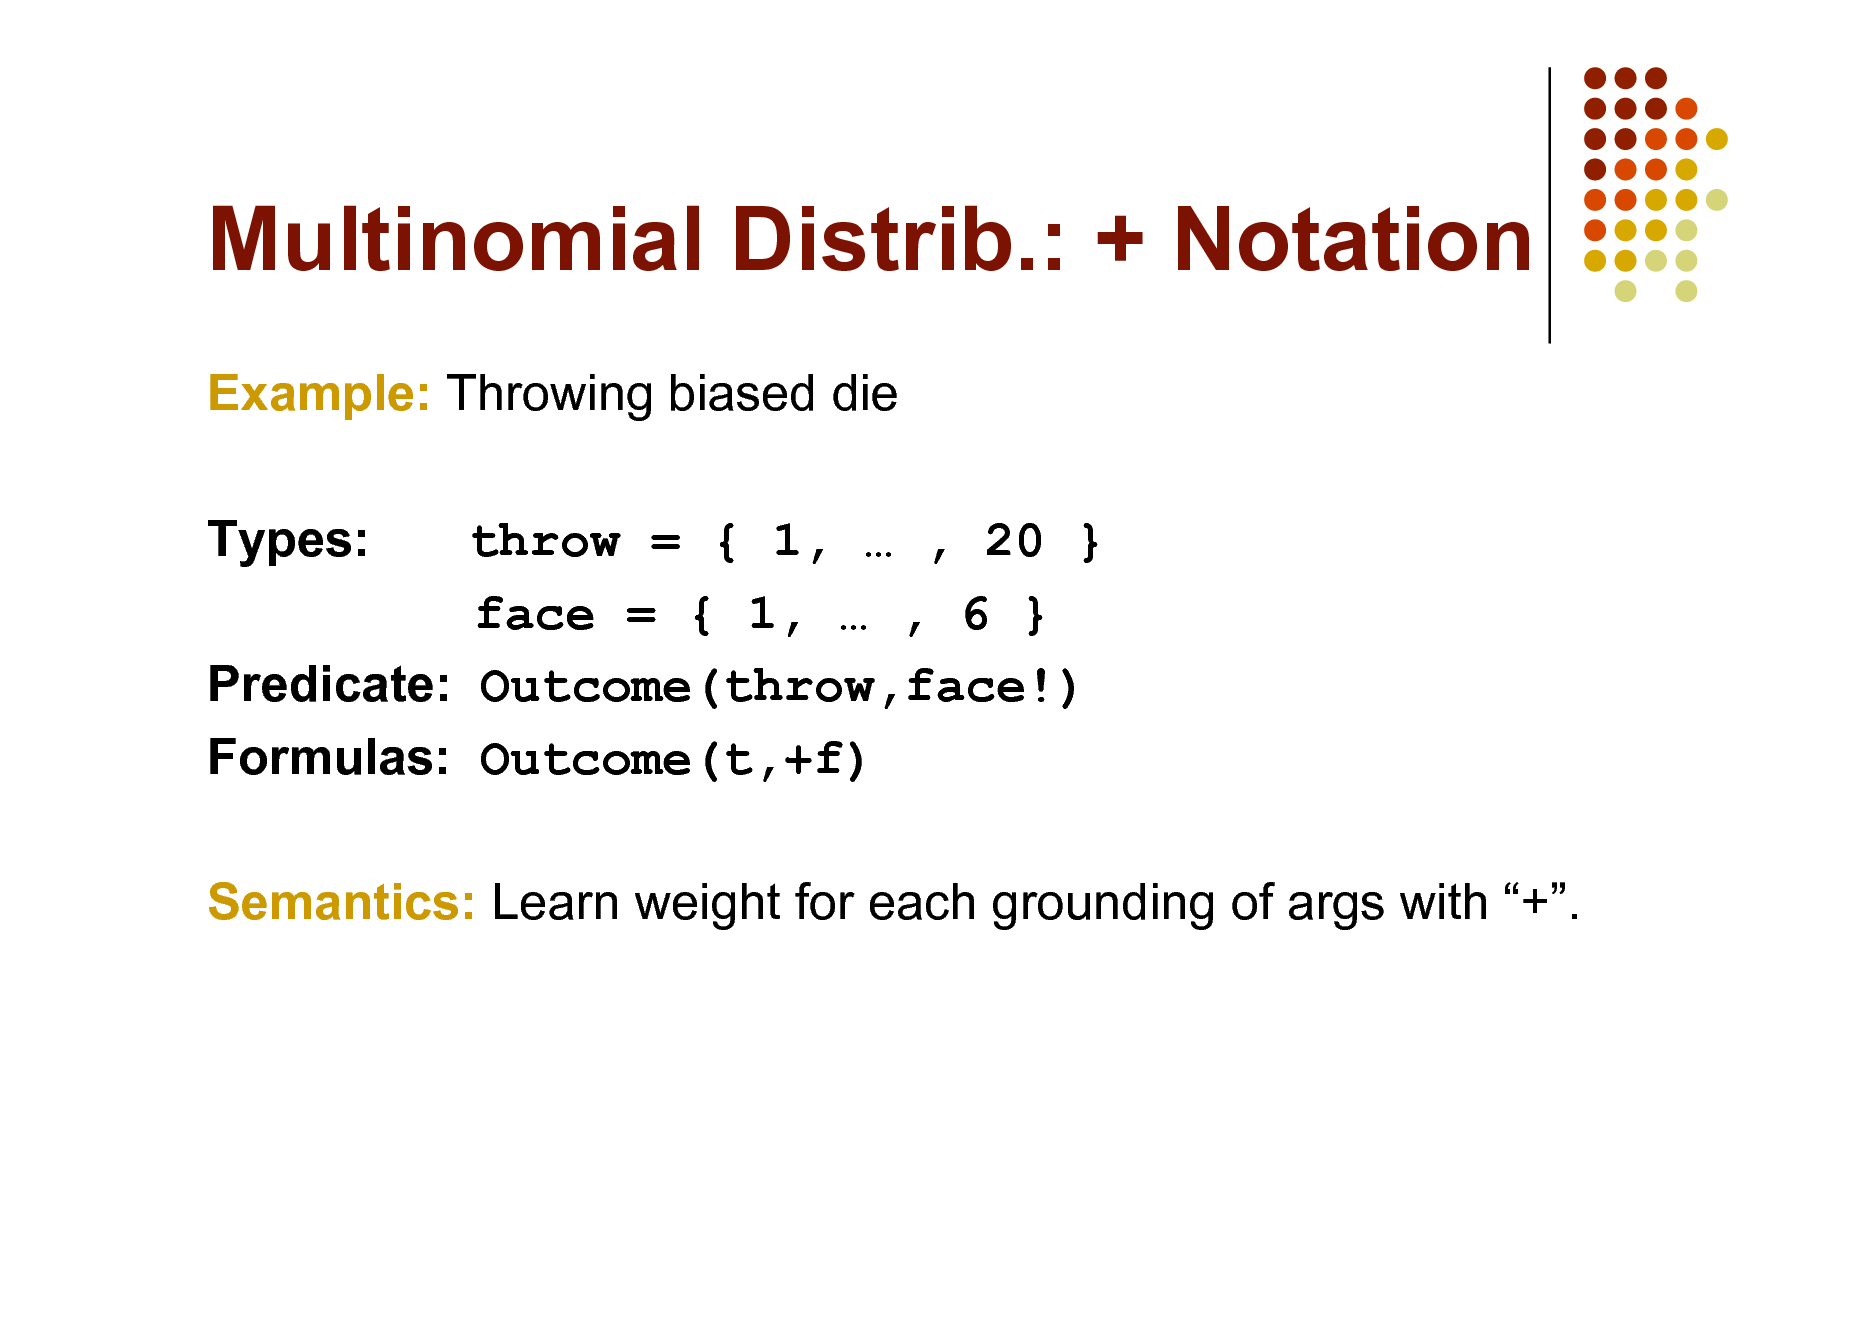 Slide: Multinomial Distrib.: + Notation
Example: Throwing biased die Types: throw = { 1,  , 20 } face = { 1,  , 6 } Predicate: Outcome(throw,face!) Formulas: Outcome(t,+f) Semantics: Learn weight for each grounding of args with +.

